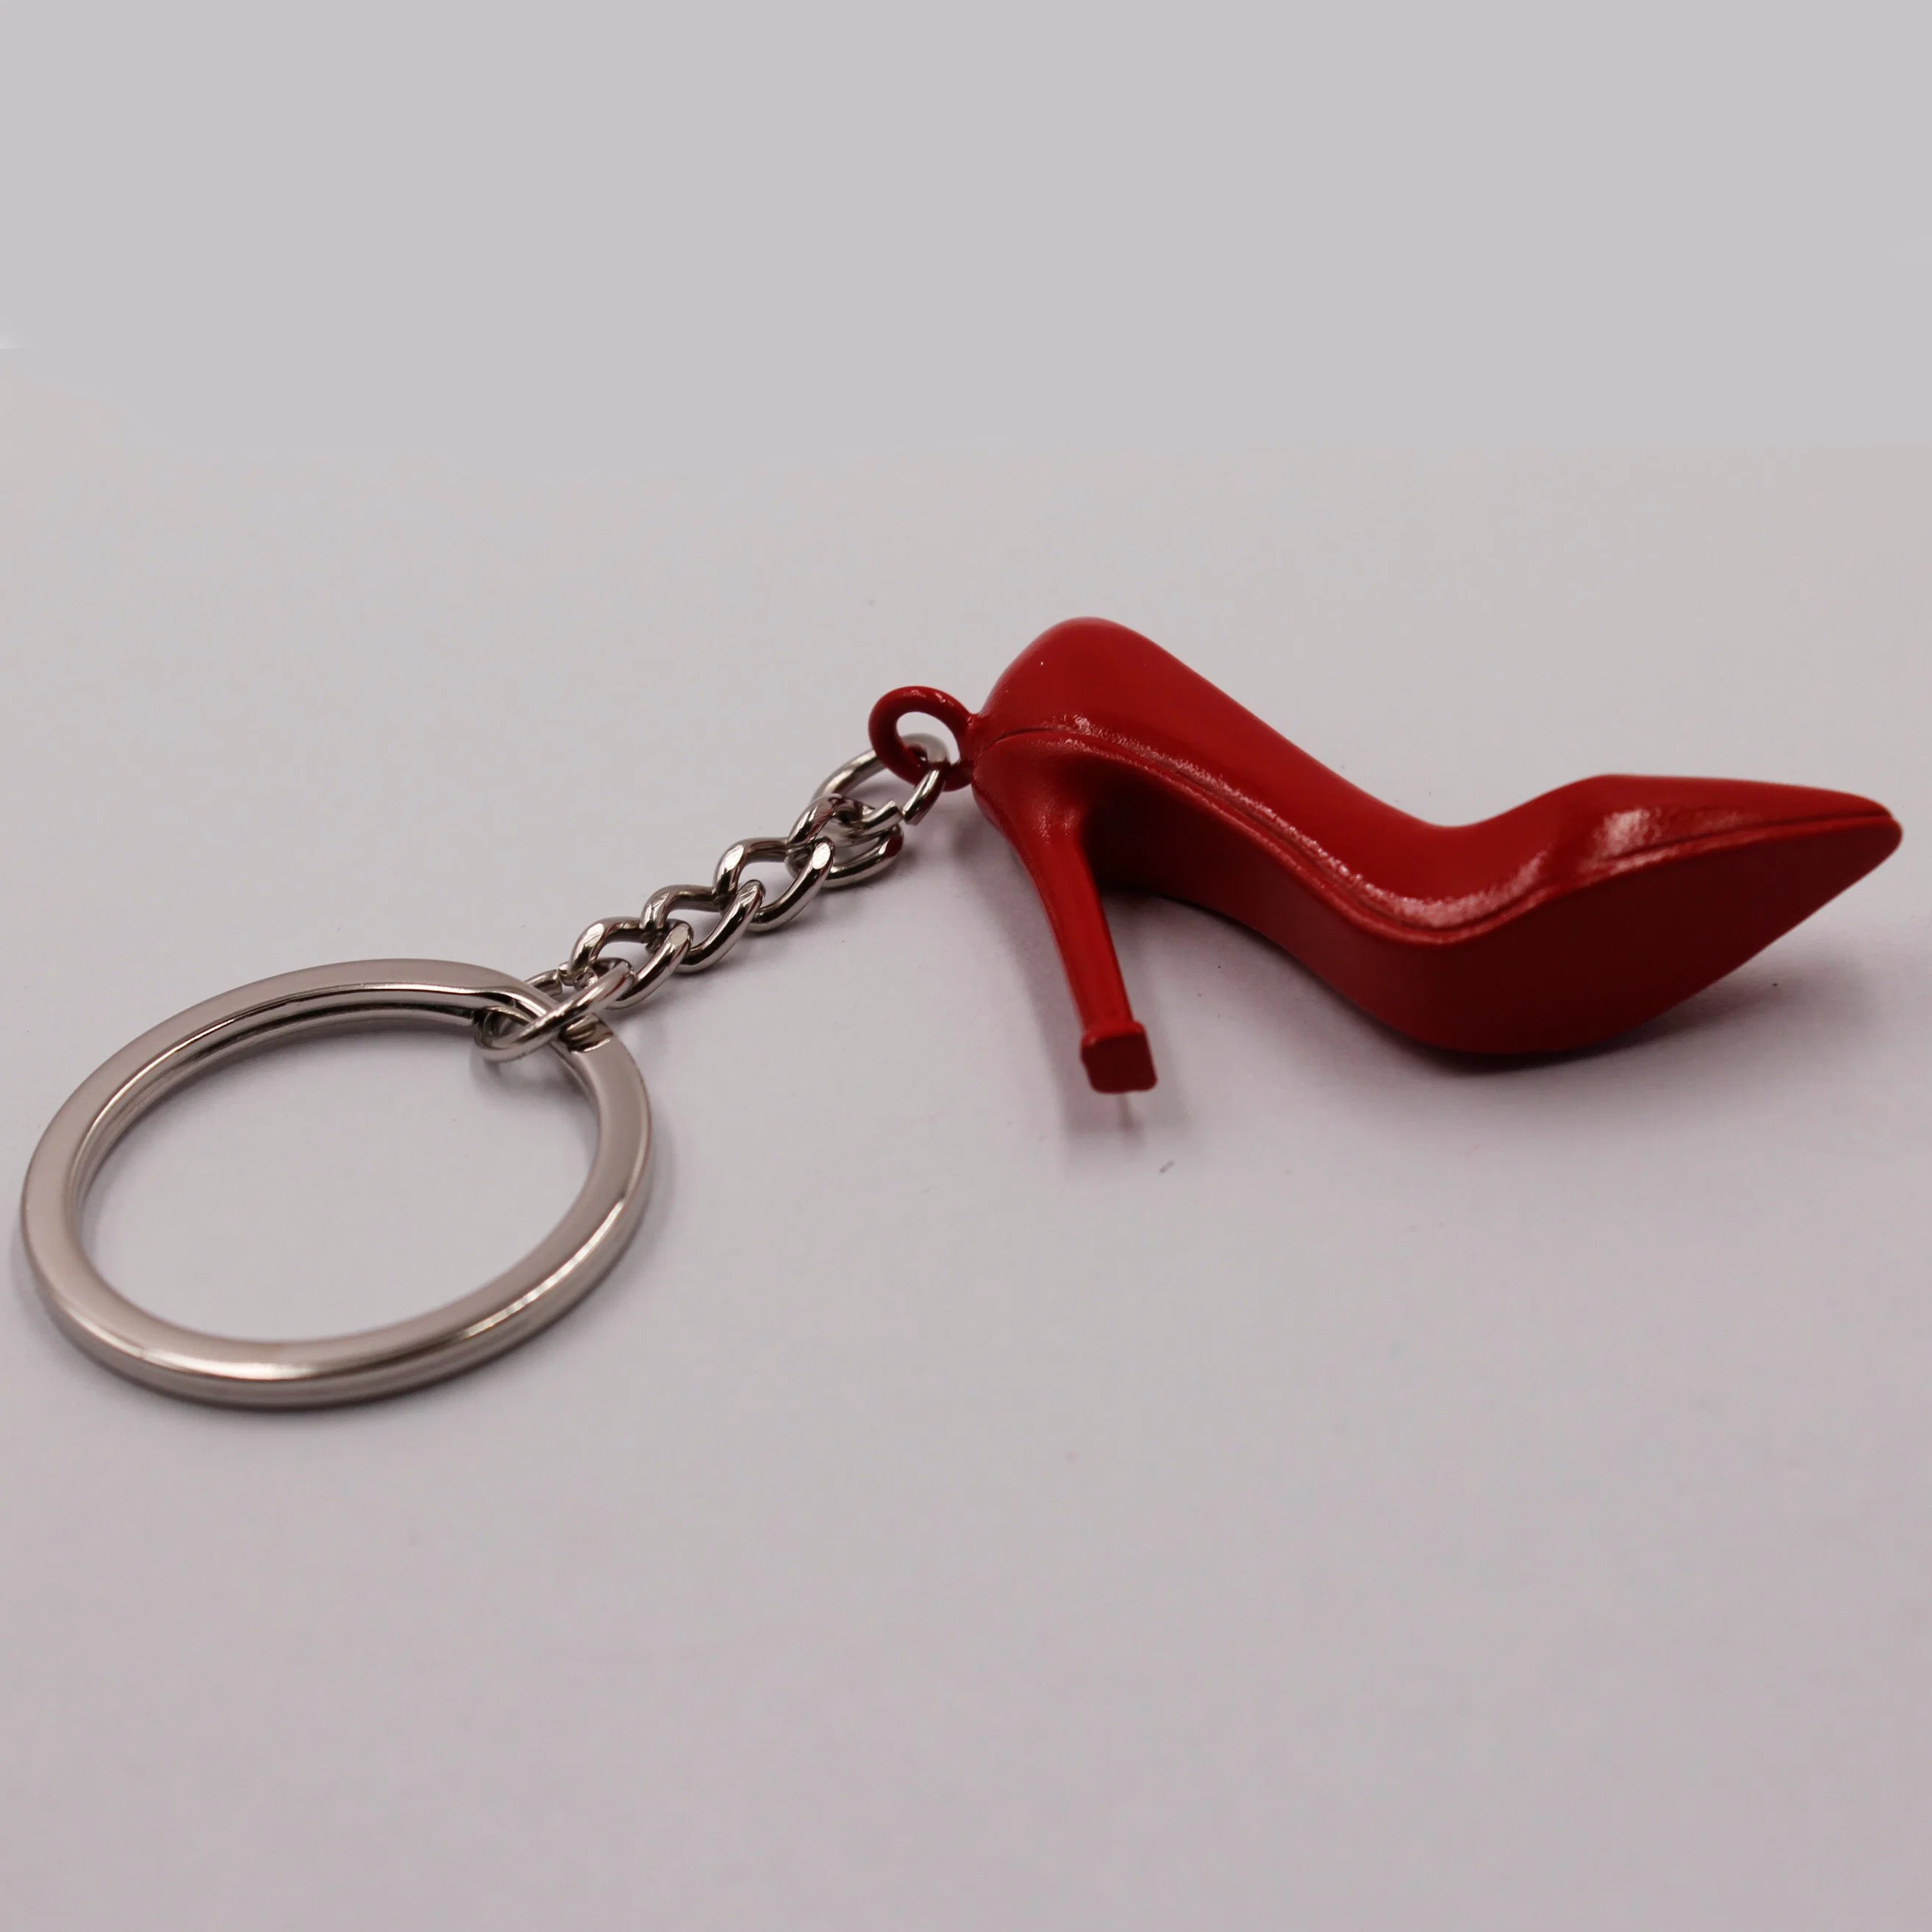 3D Metal Lady Red High-Heeled Shoes Charm Key Ring